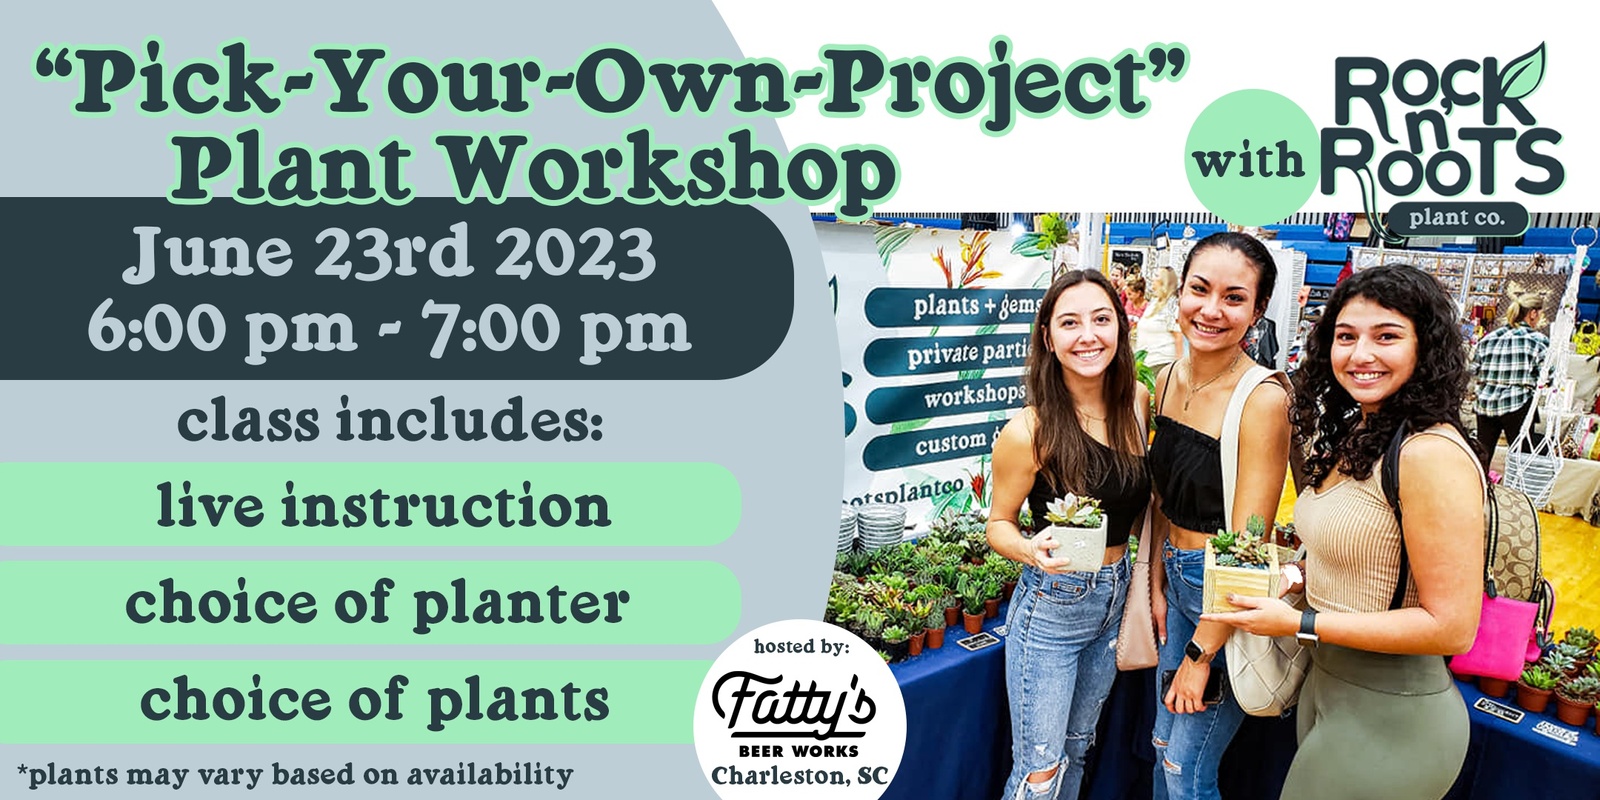 Banner image for PICK-YOUR-OWN-PROJECT Workshop at Fatty's Beer Works (Charleston, SC)